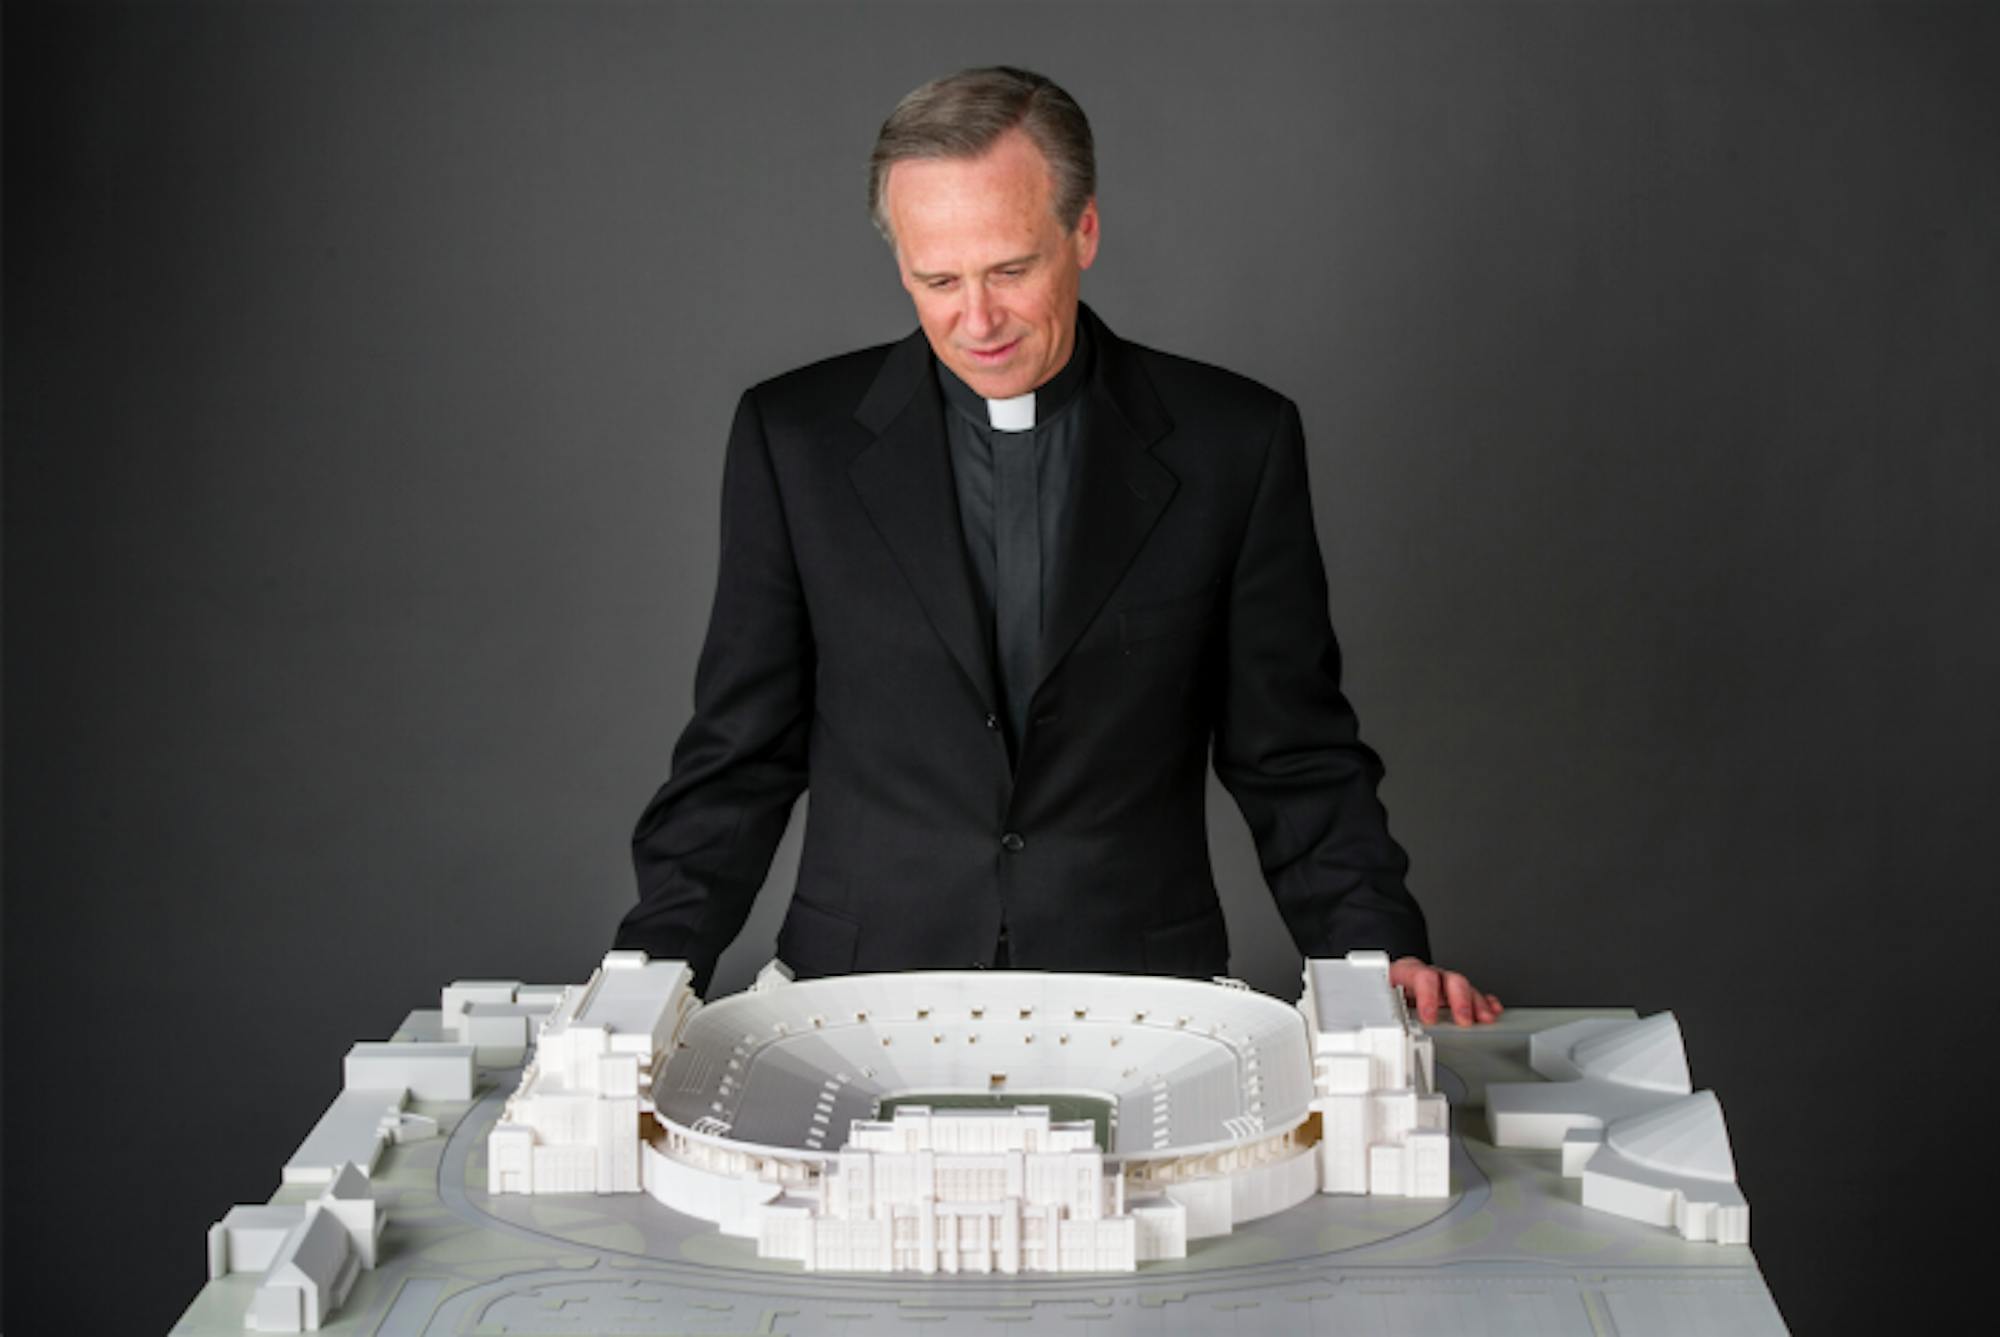 Fr. John Jenkins surveys a model for the Stadium expansion that was presented to the Board of Trustees for approval on Jan. 29.